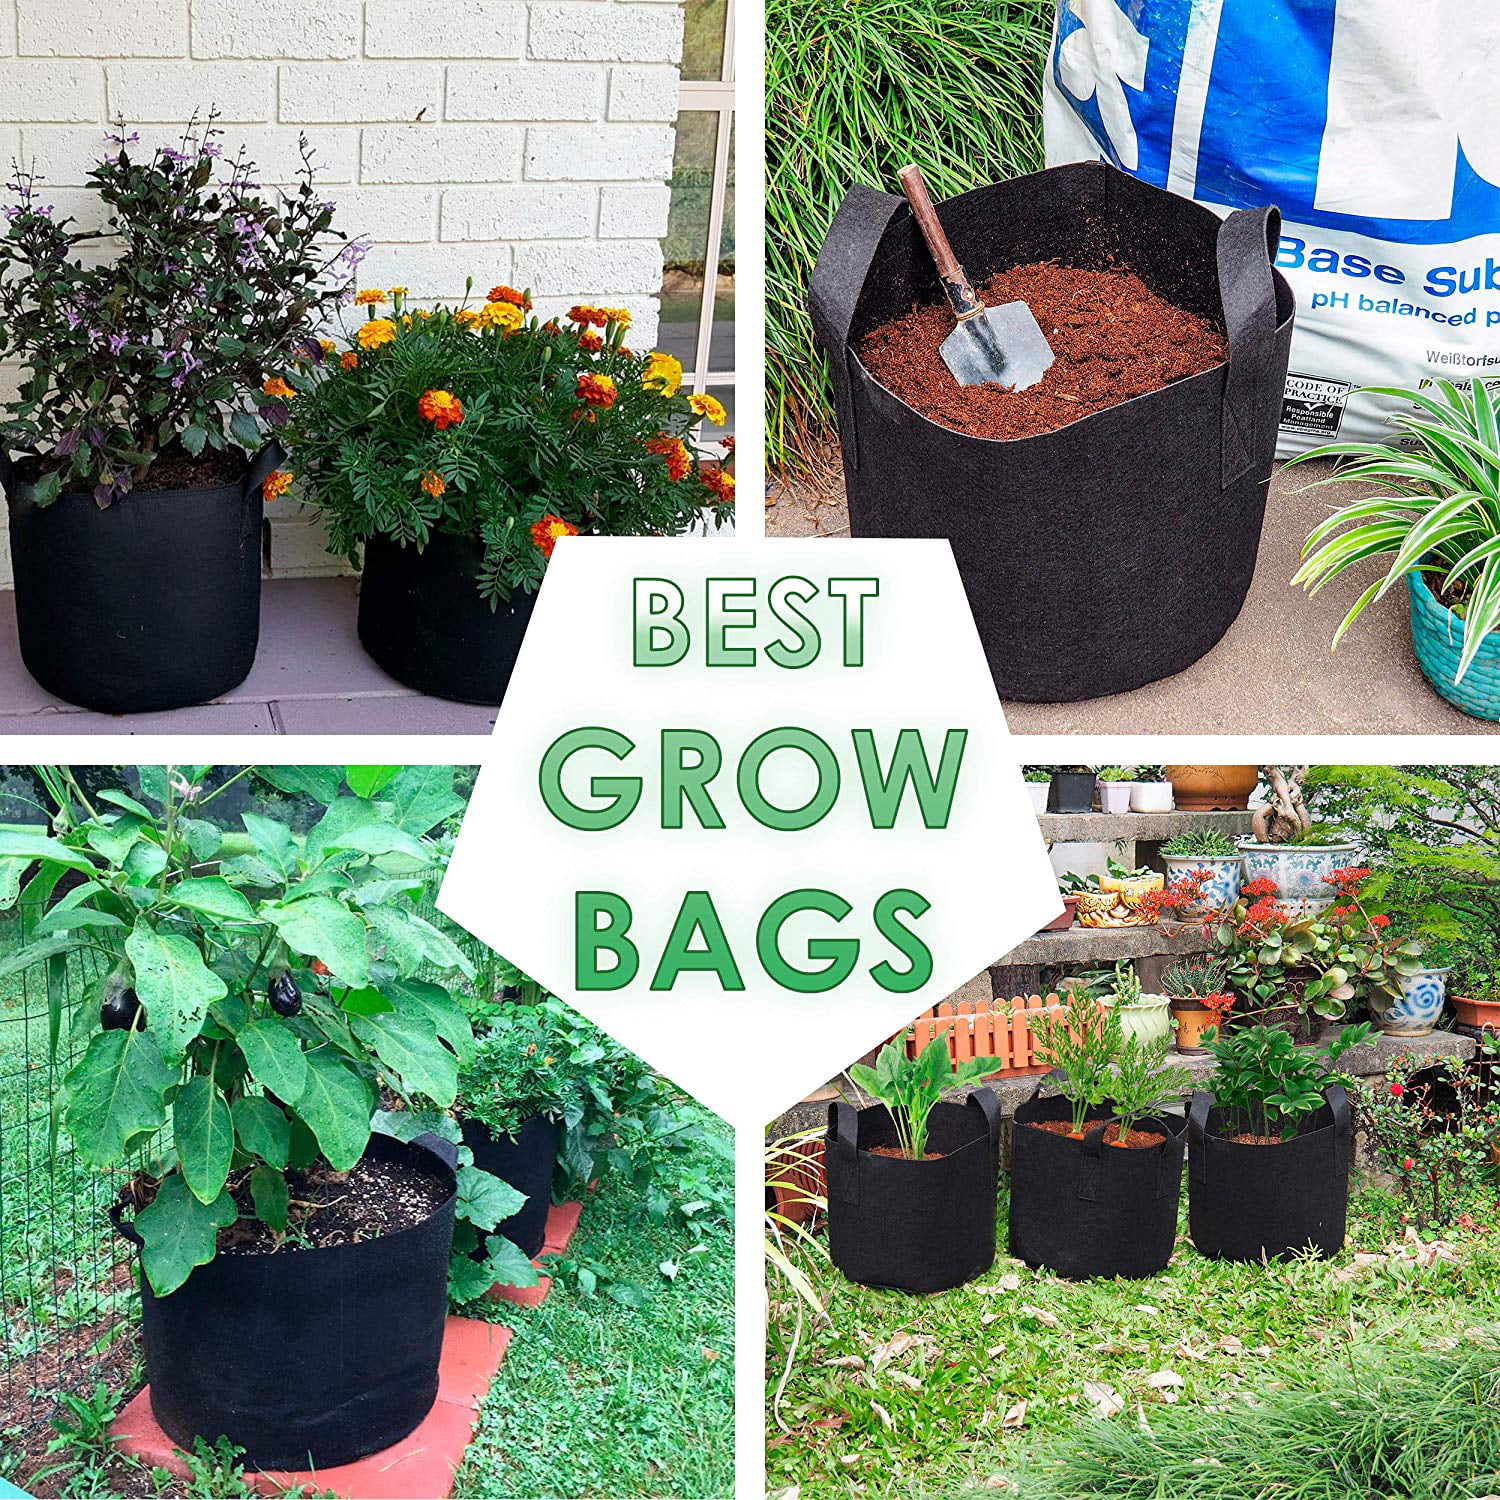 10Pack Grow Bags Garden Heavy Duty Non-Woven Aeration Plant Fabric Pot Container 